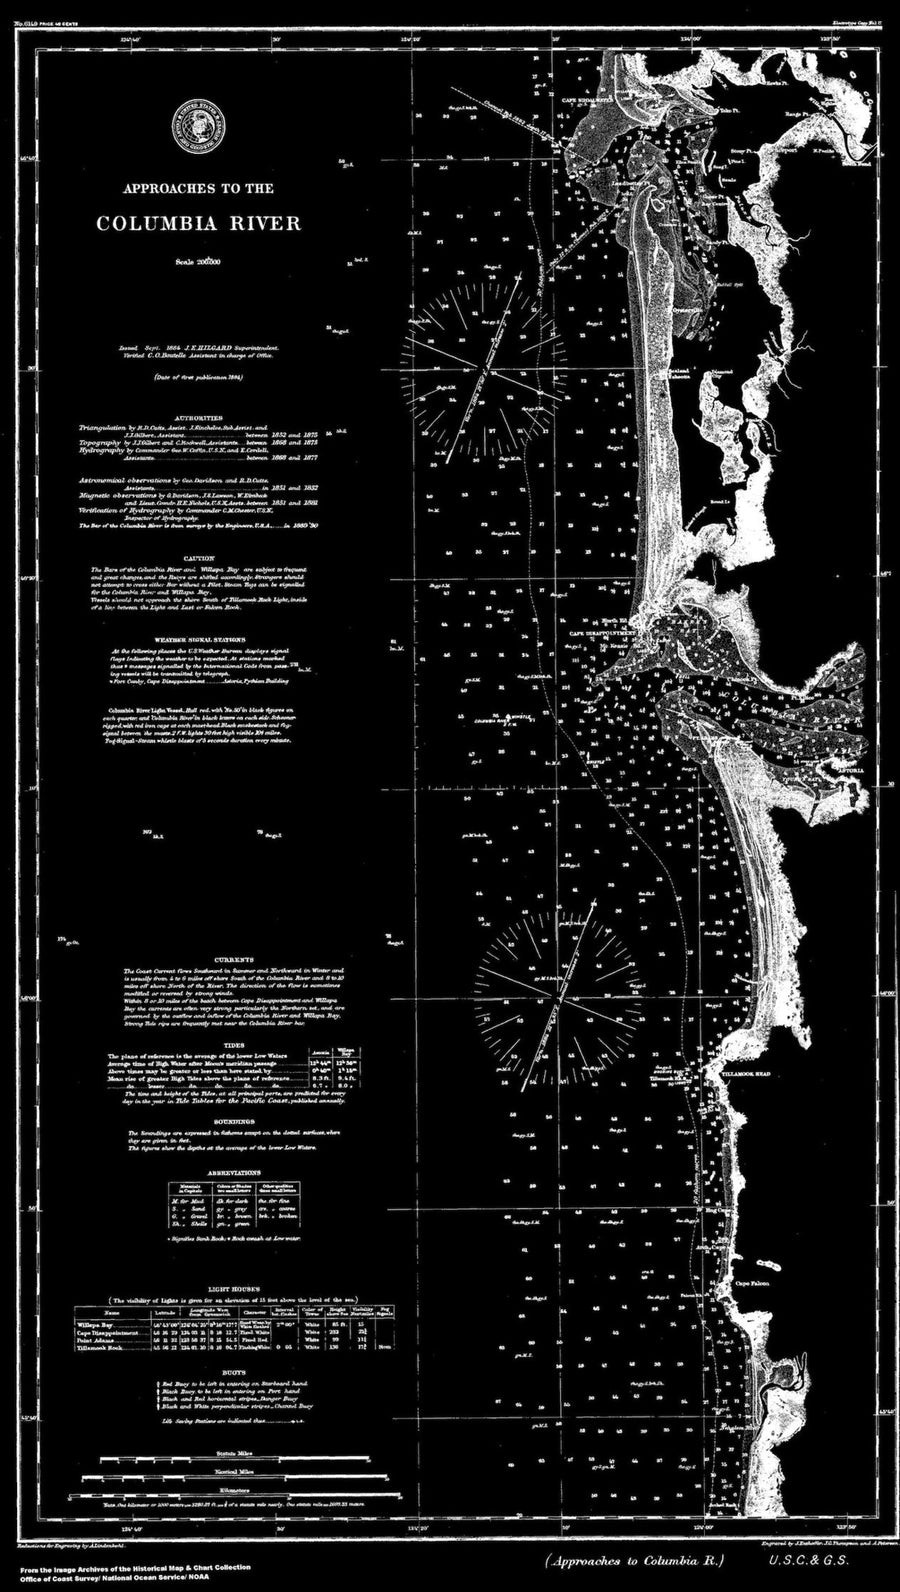 Columbia River Approaches Map - 1846